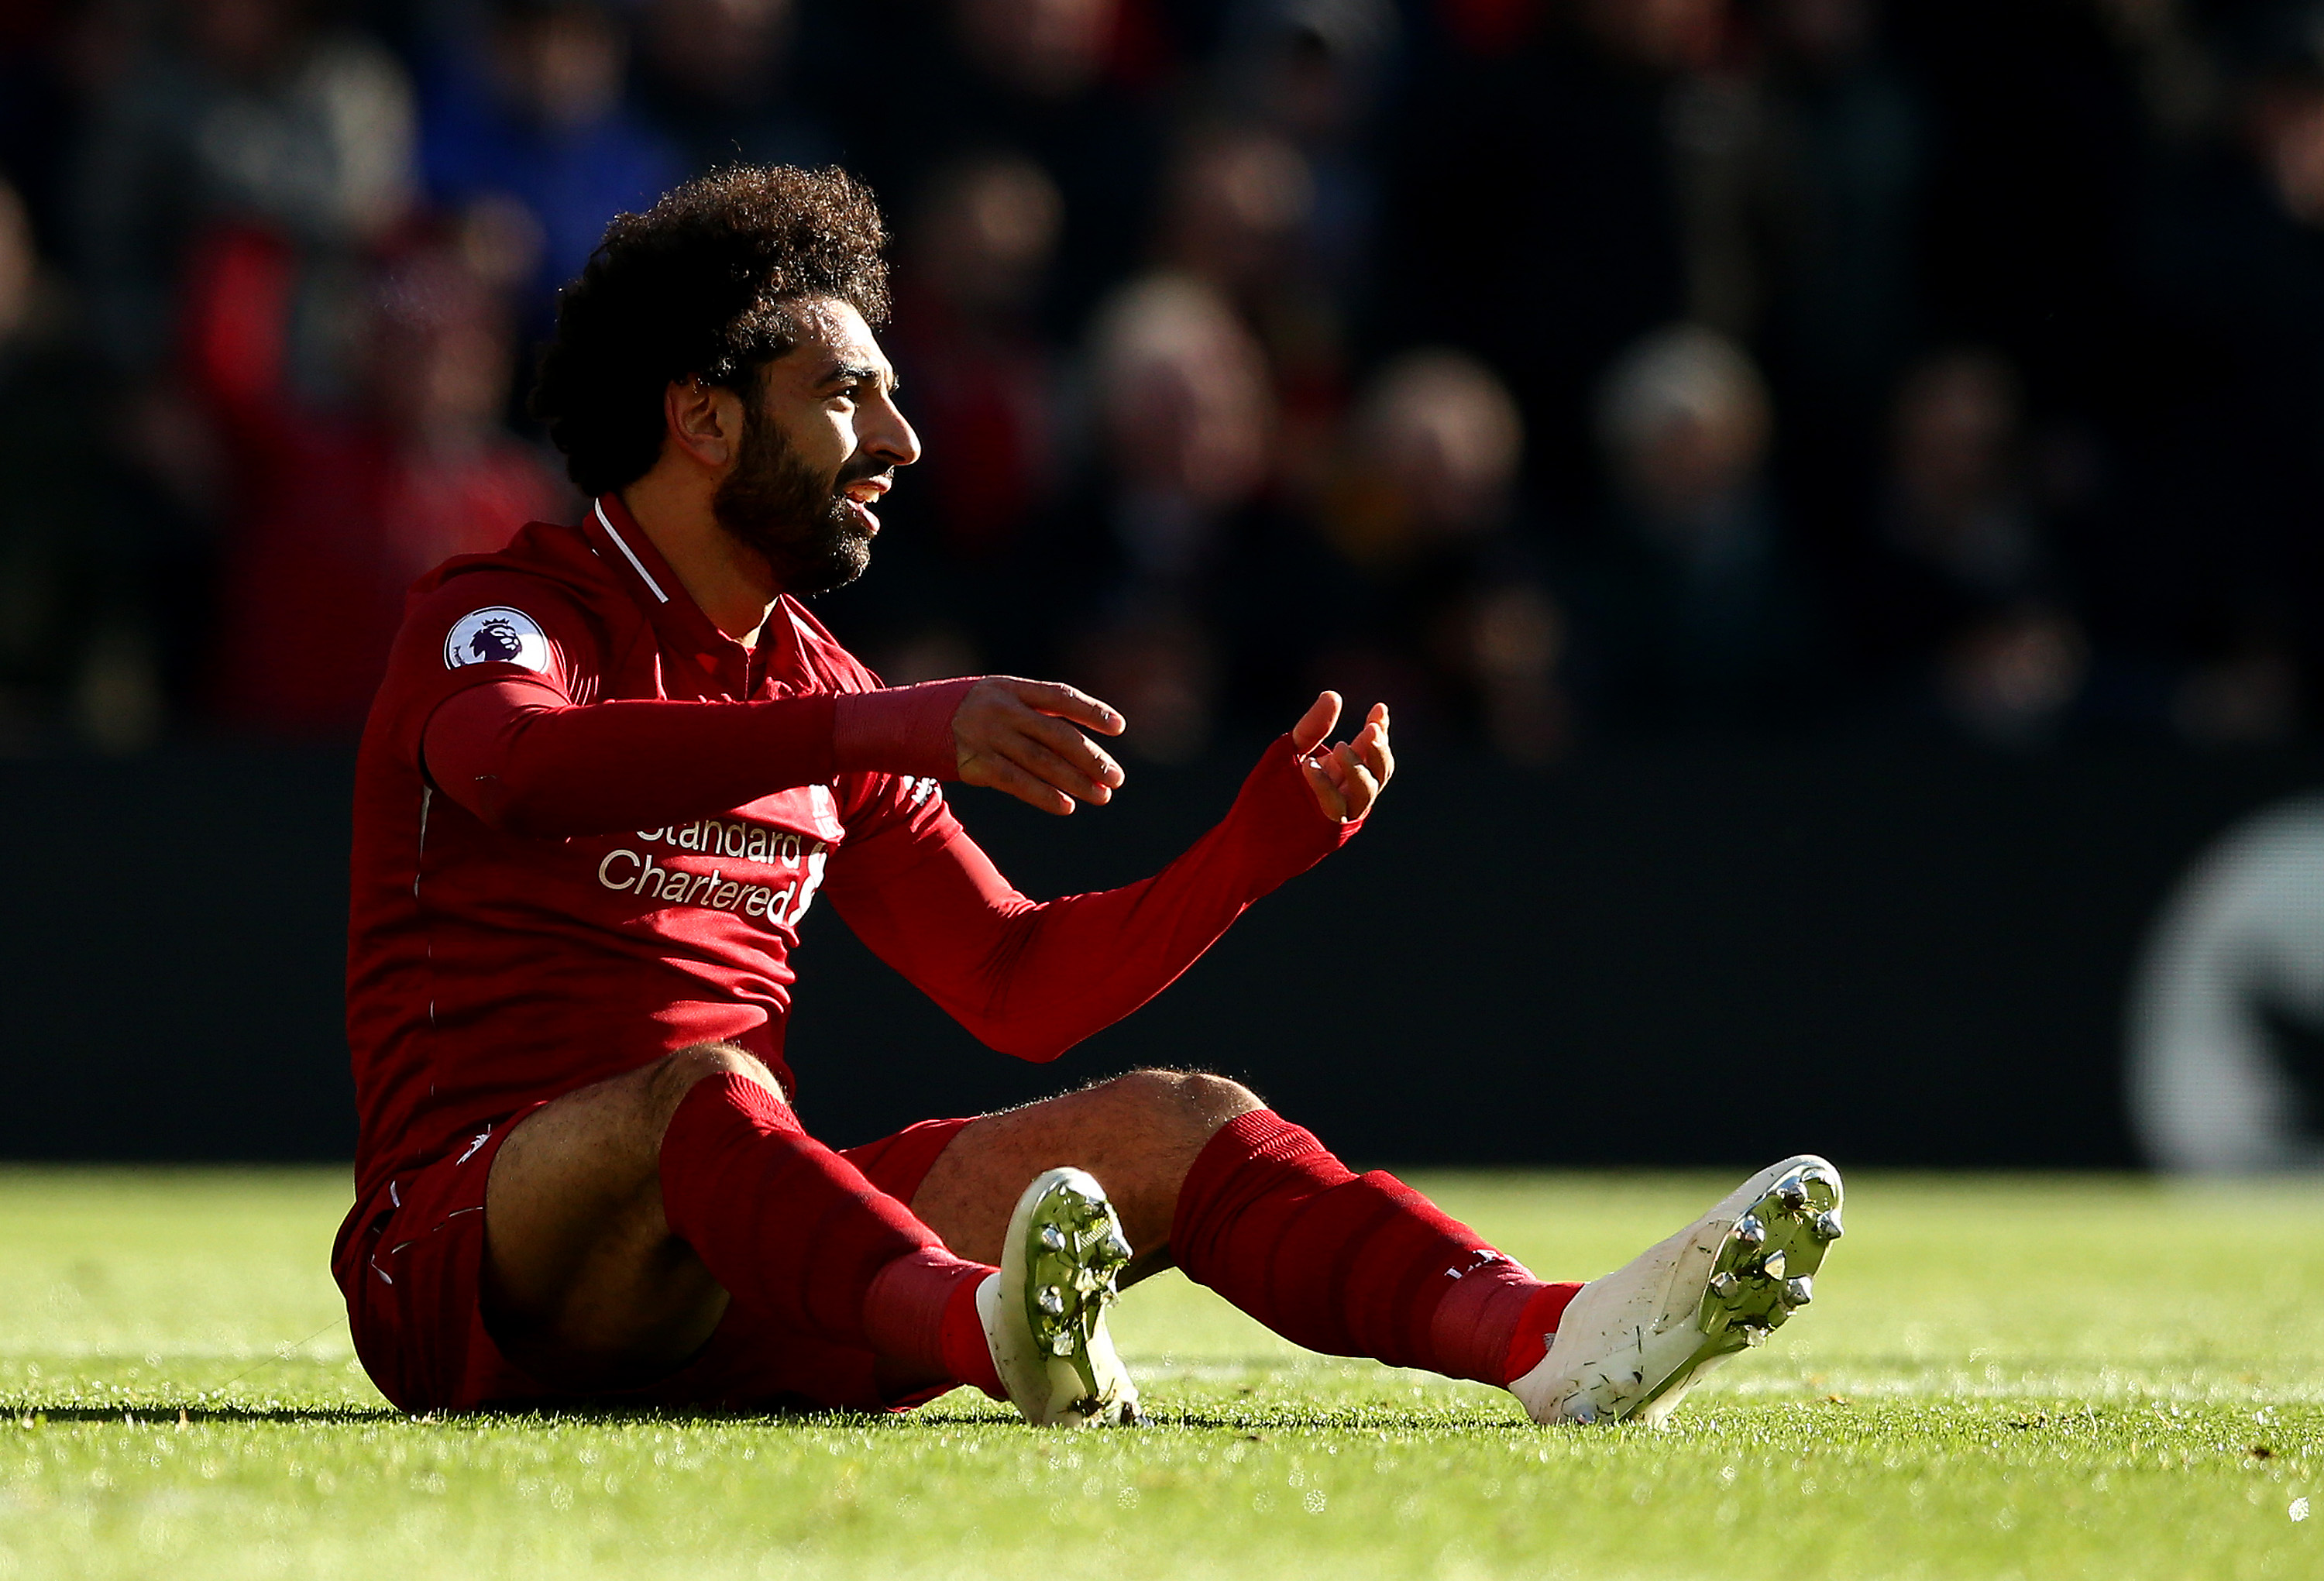 LIVERPOOL, ENGLAND - OCTOBER 27:  Mohamed Salah of Liverpool reacts during the Premier League match between Liverpool FC and Cardiff City at Anfield on October 27, 2018 in Liverpool, United Kingdom.  (Photo by Jan Kruger/Getty Images)